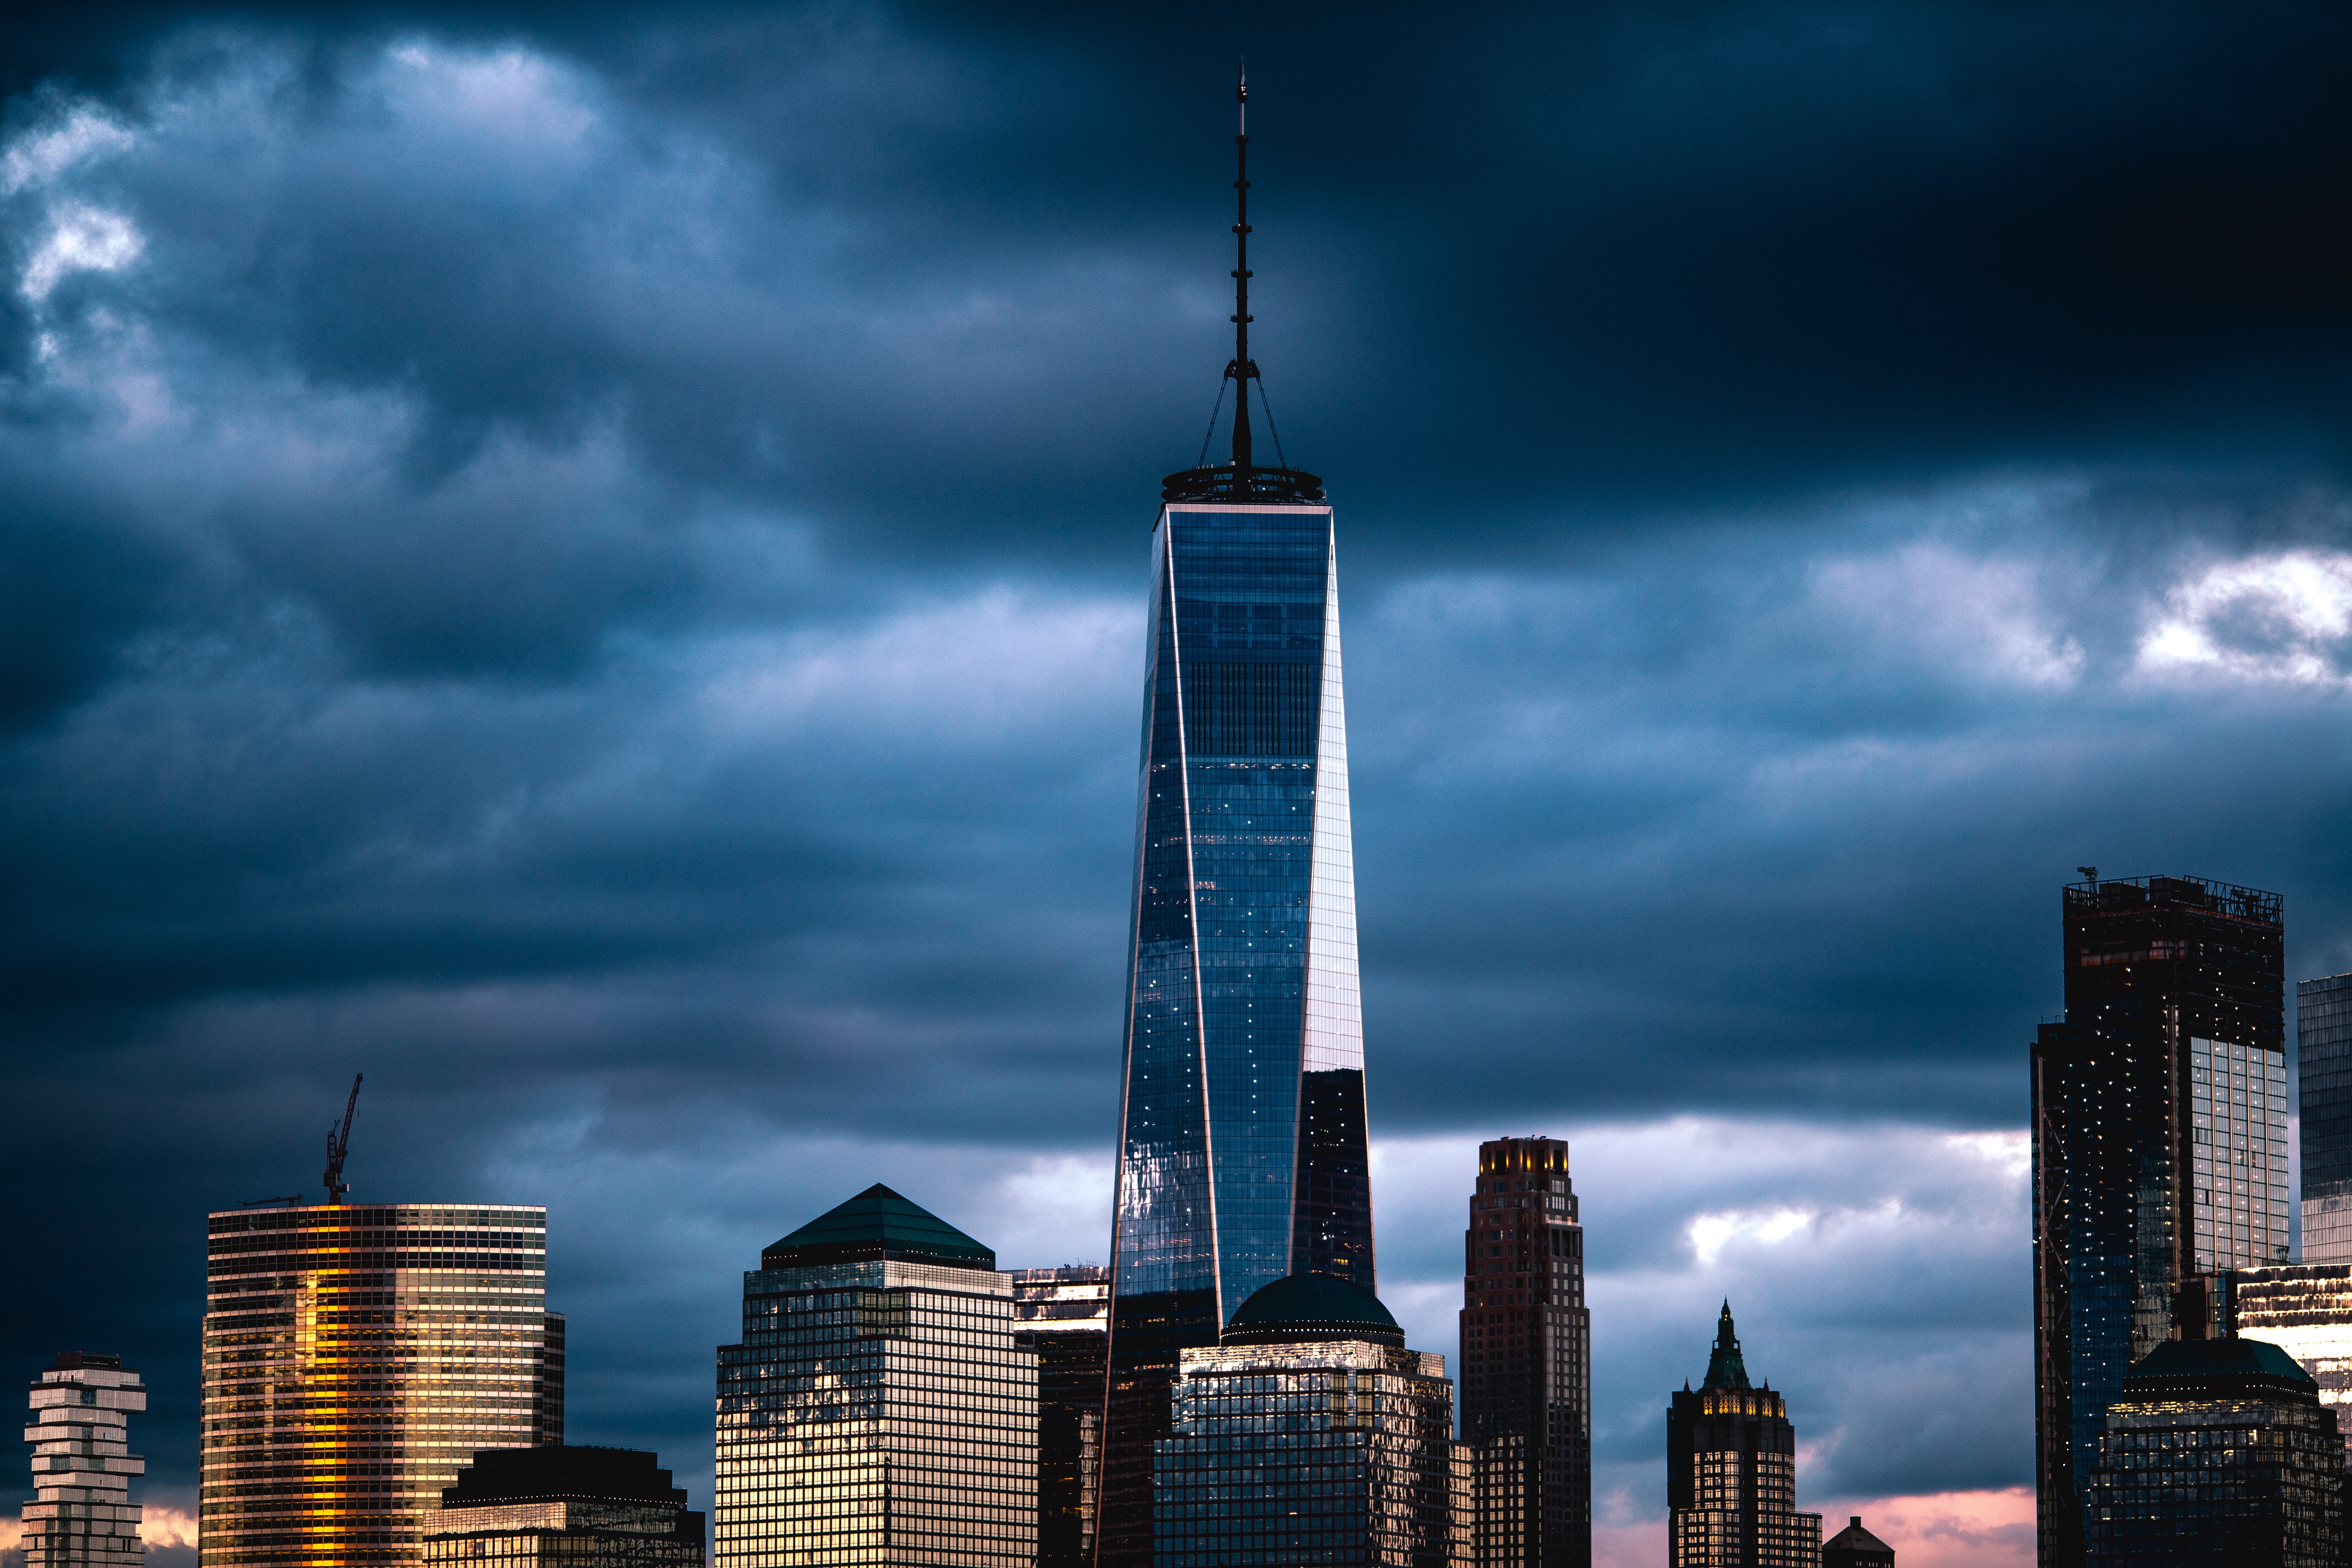 overcast, cities, clouds, usa, skyscraper, united states, mainly cloudy, new york